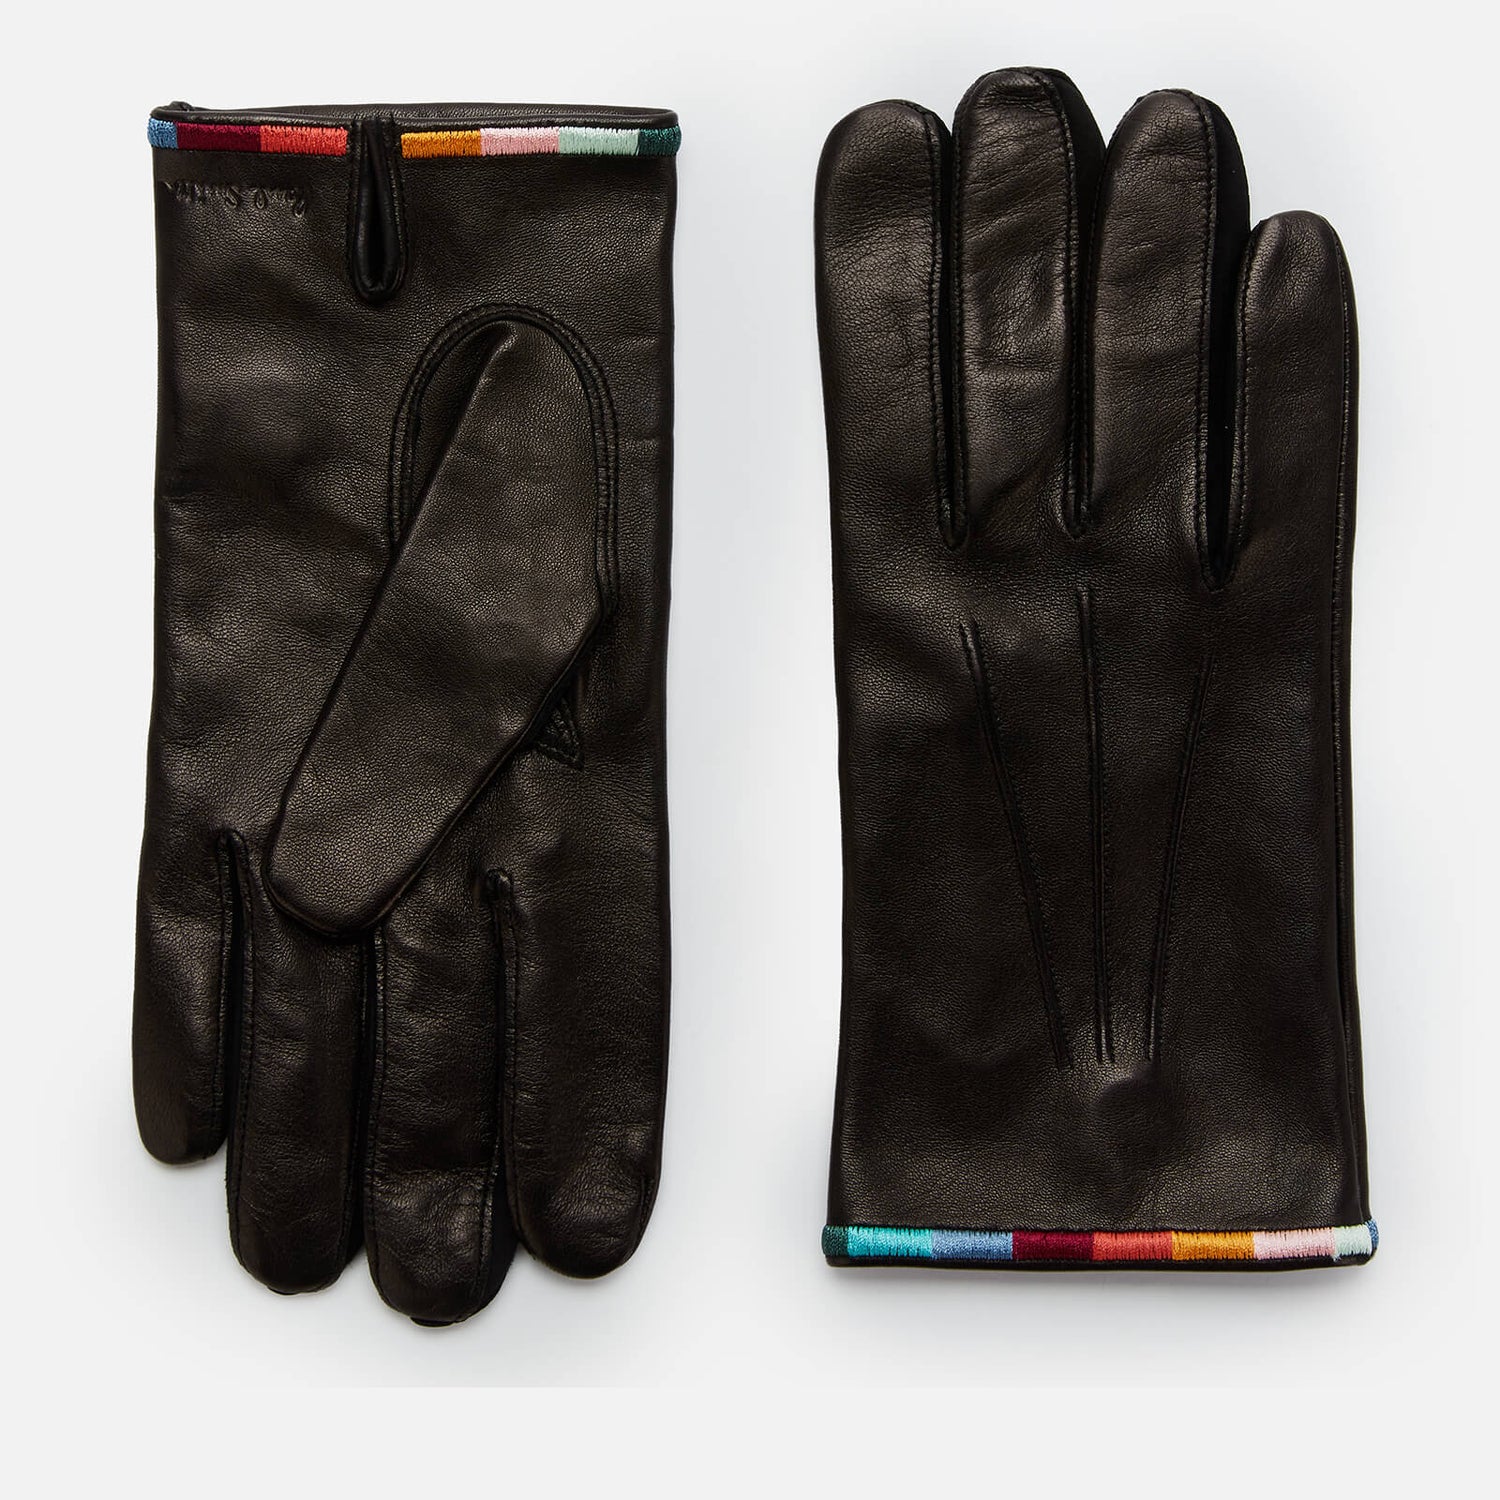 PS Paul Smith Men's Embroidered Leather Gloves - Black - S